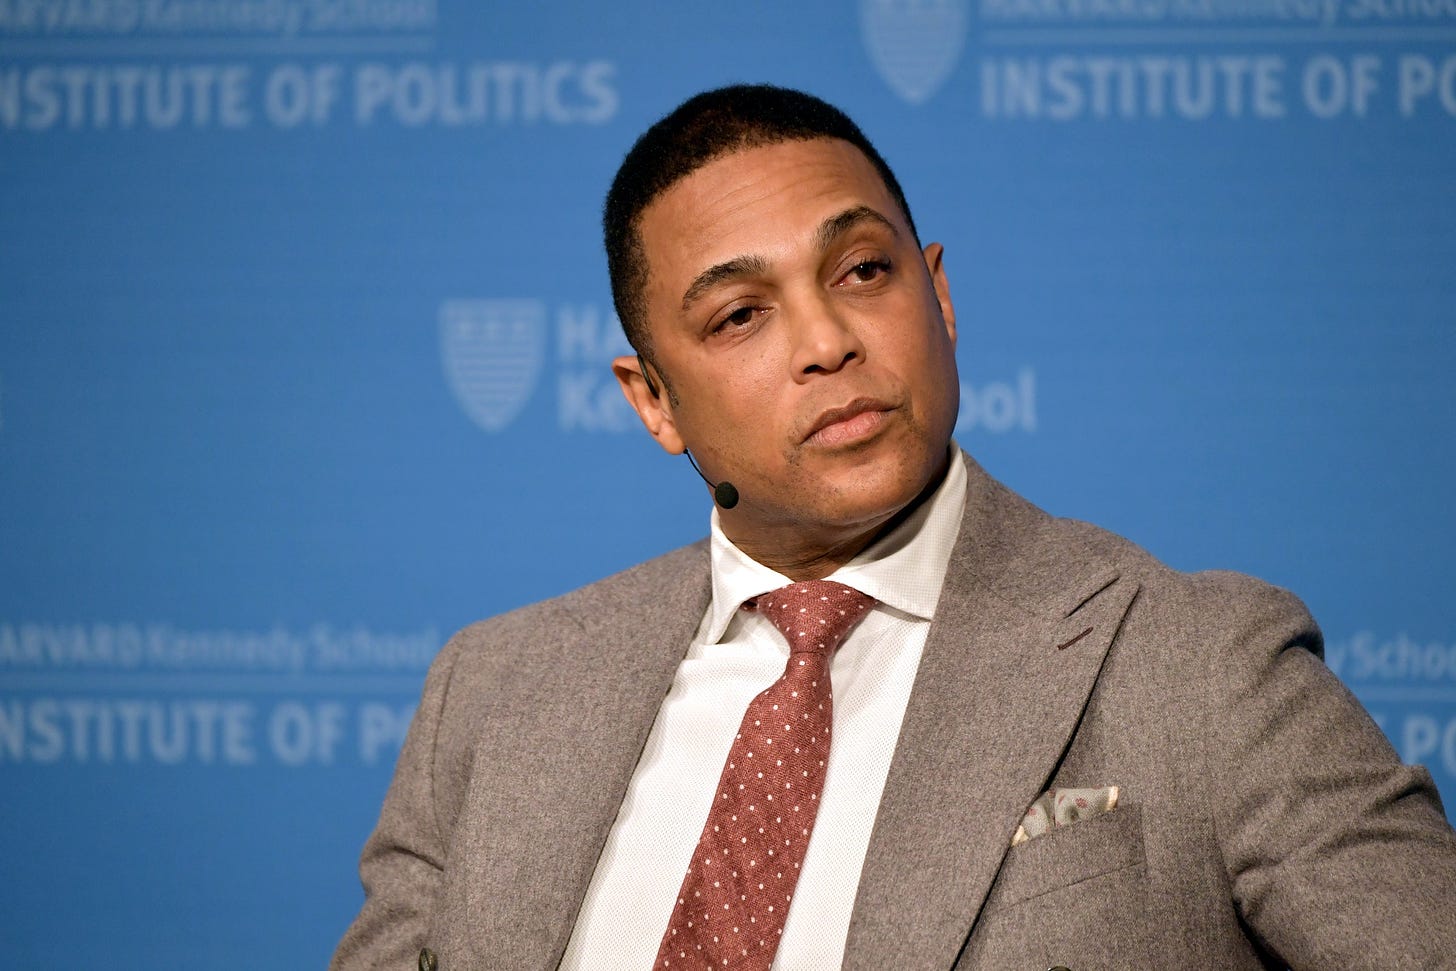 Don Lemon Is Out at CNN Following Controversial Comments | Glamour